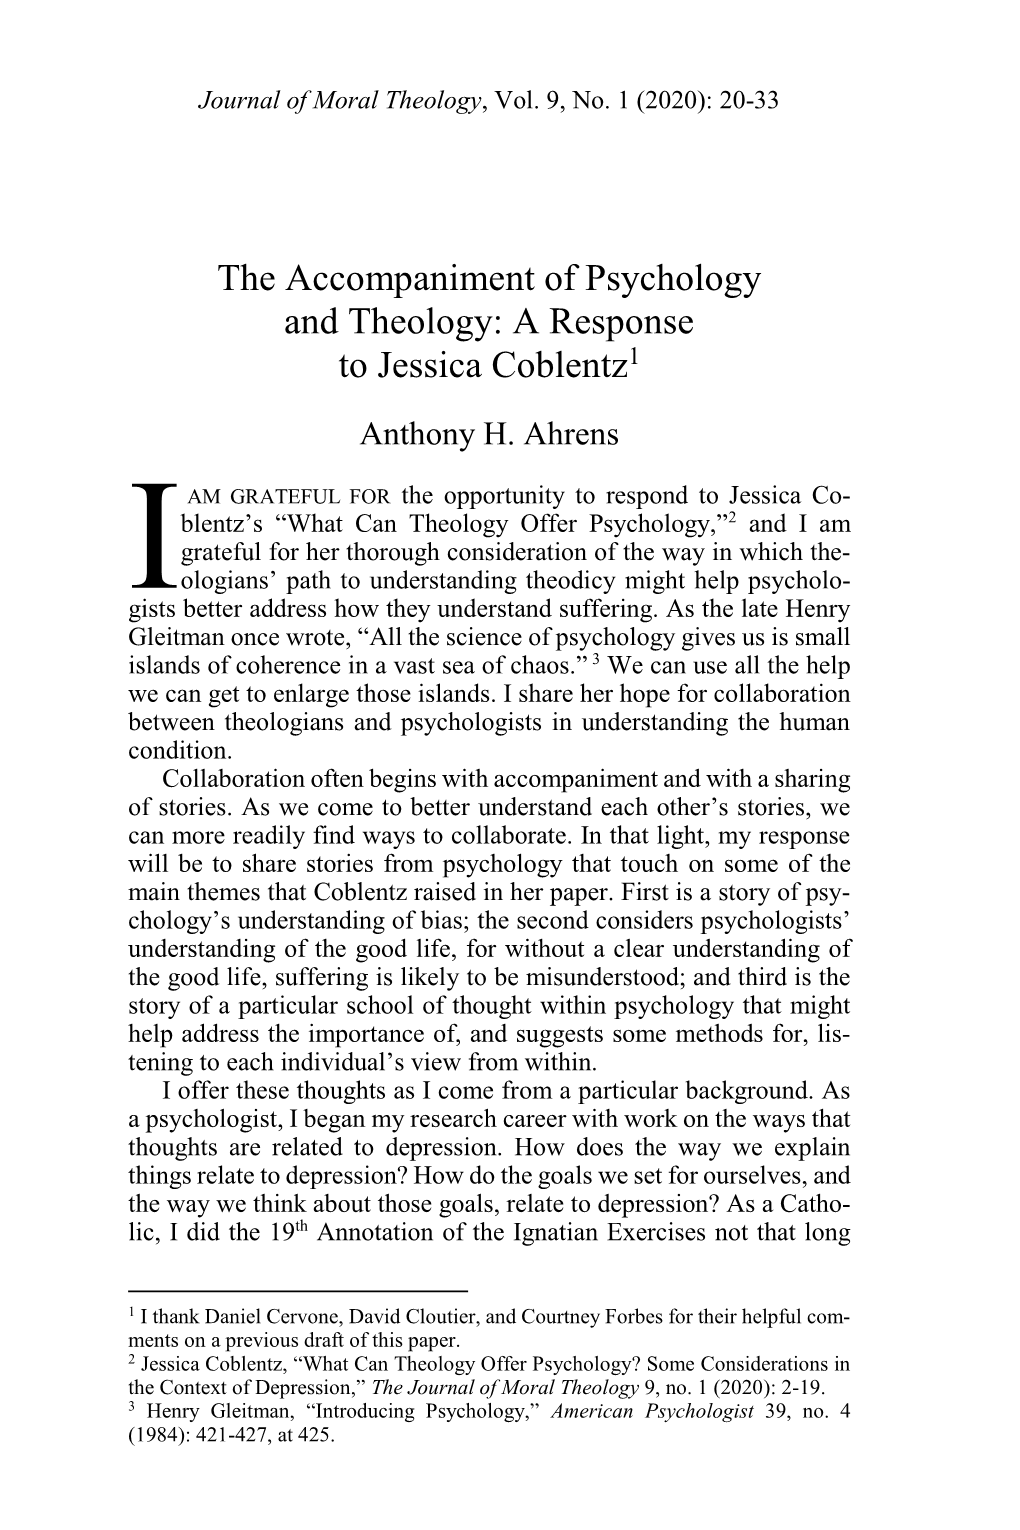 The Accompaniment of Psychology and Theology: a Response to Jessica Coblentz1